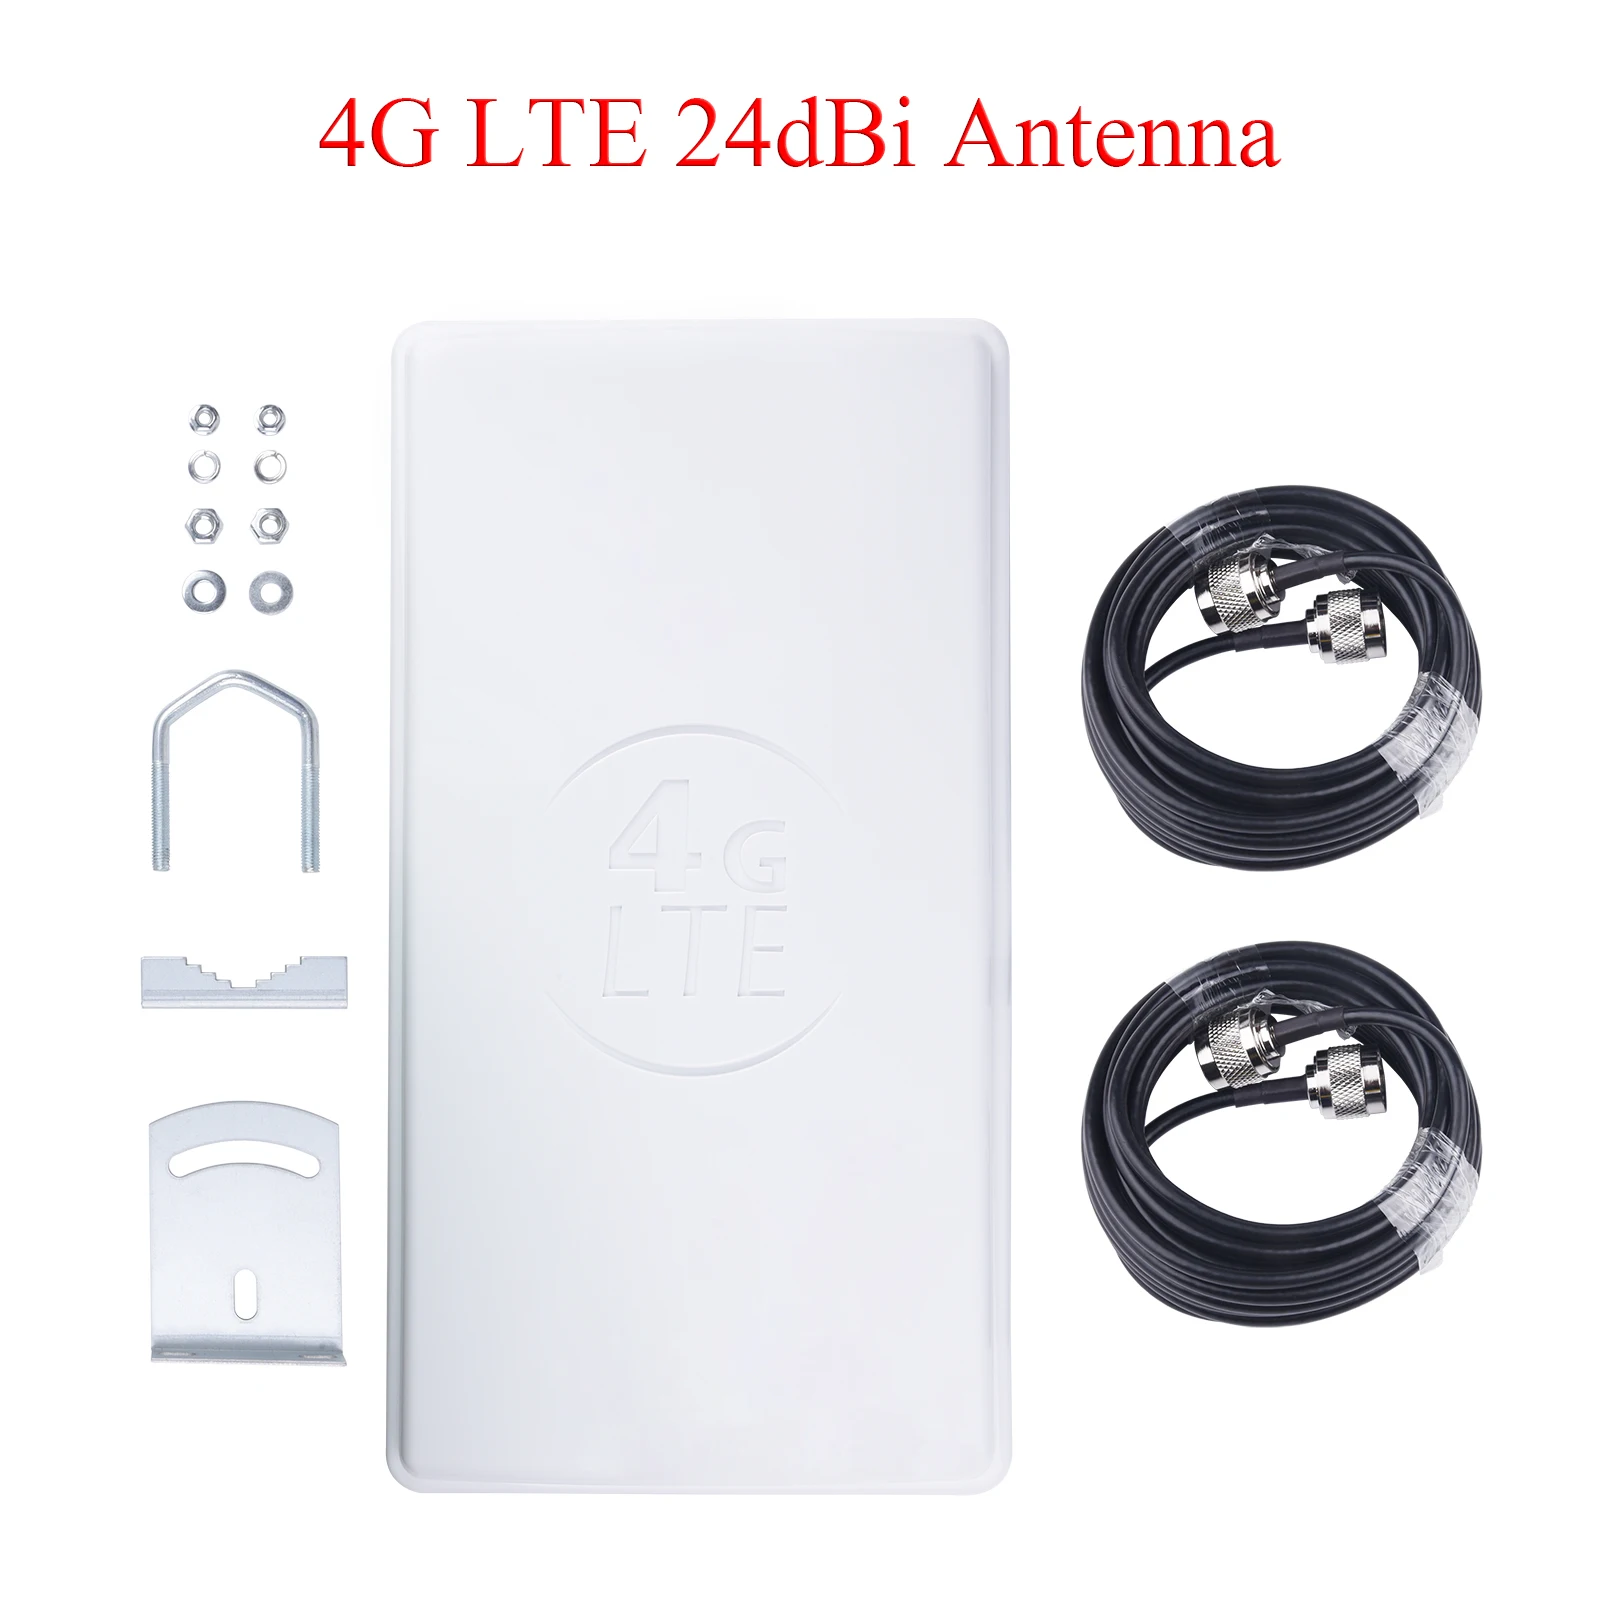 4G LTE 24dBi Antenna 698-2690MHz MIMO Outdoor Antenna N Female Jack Connector Signal Booster For 3G 4G Router Modem